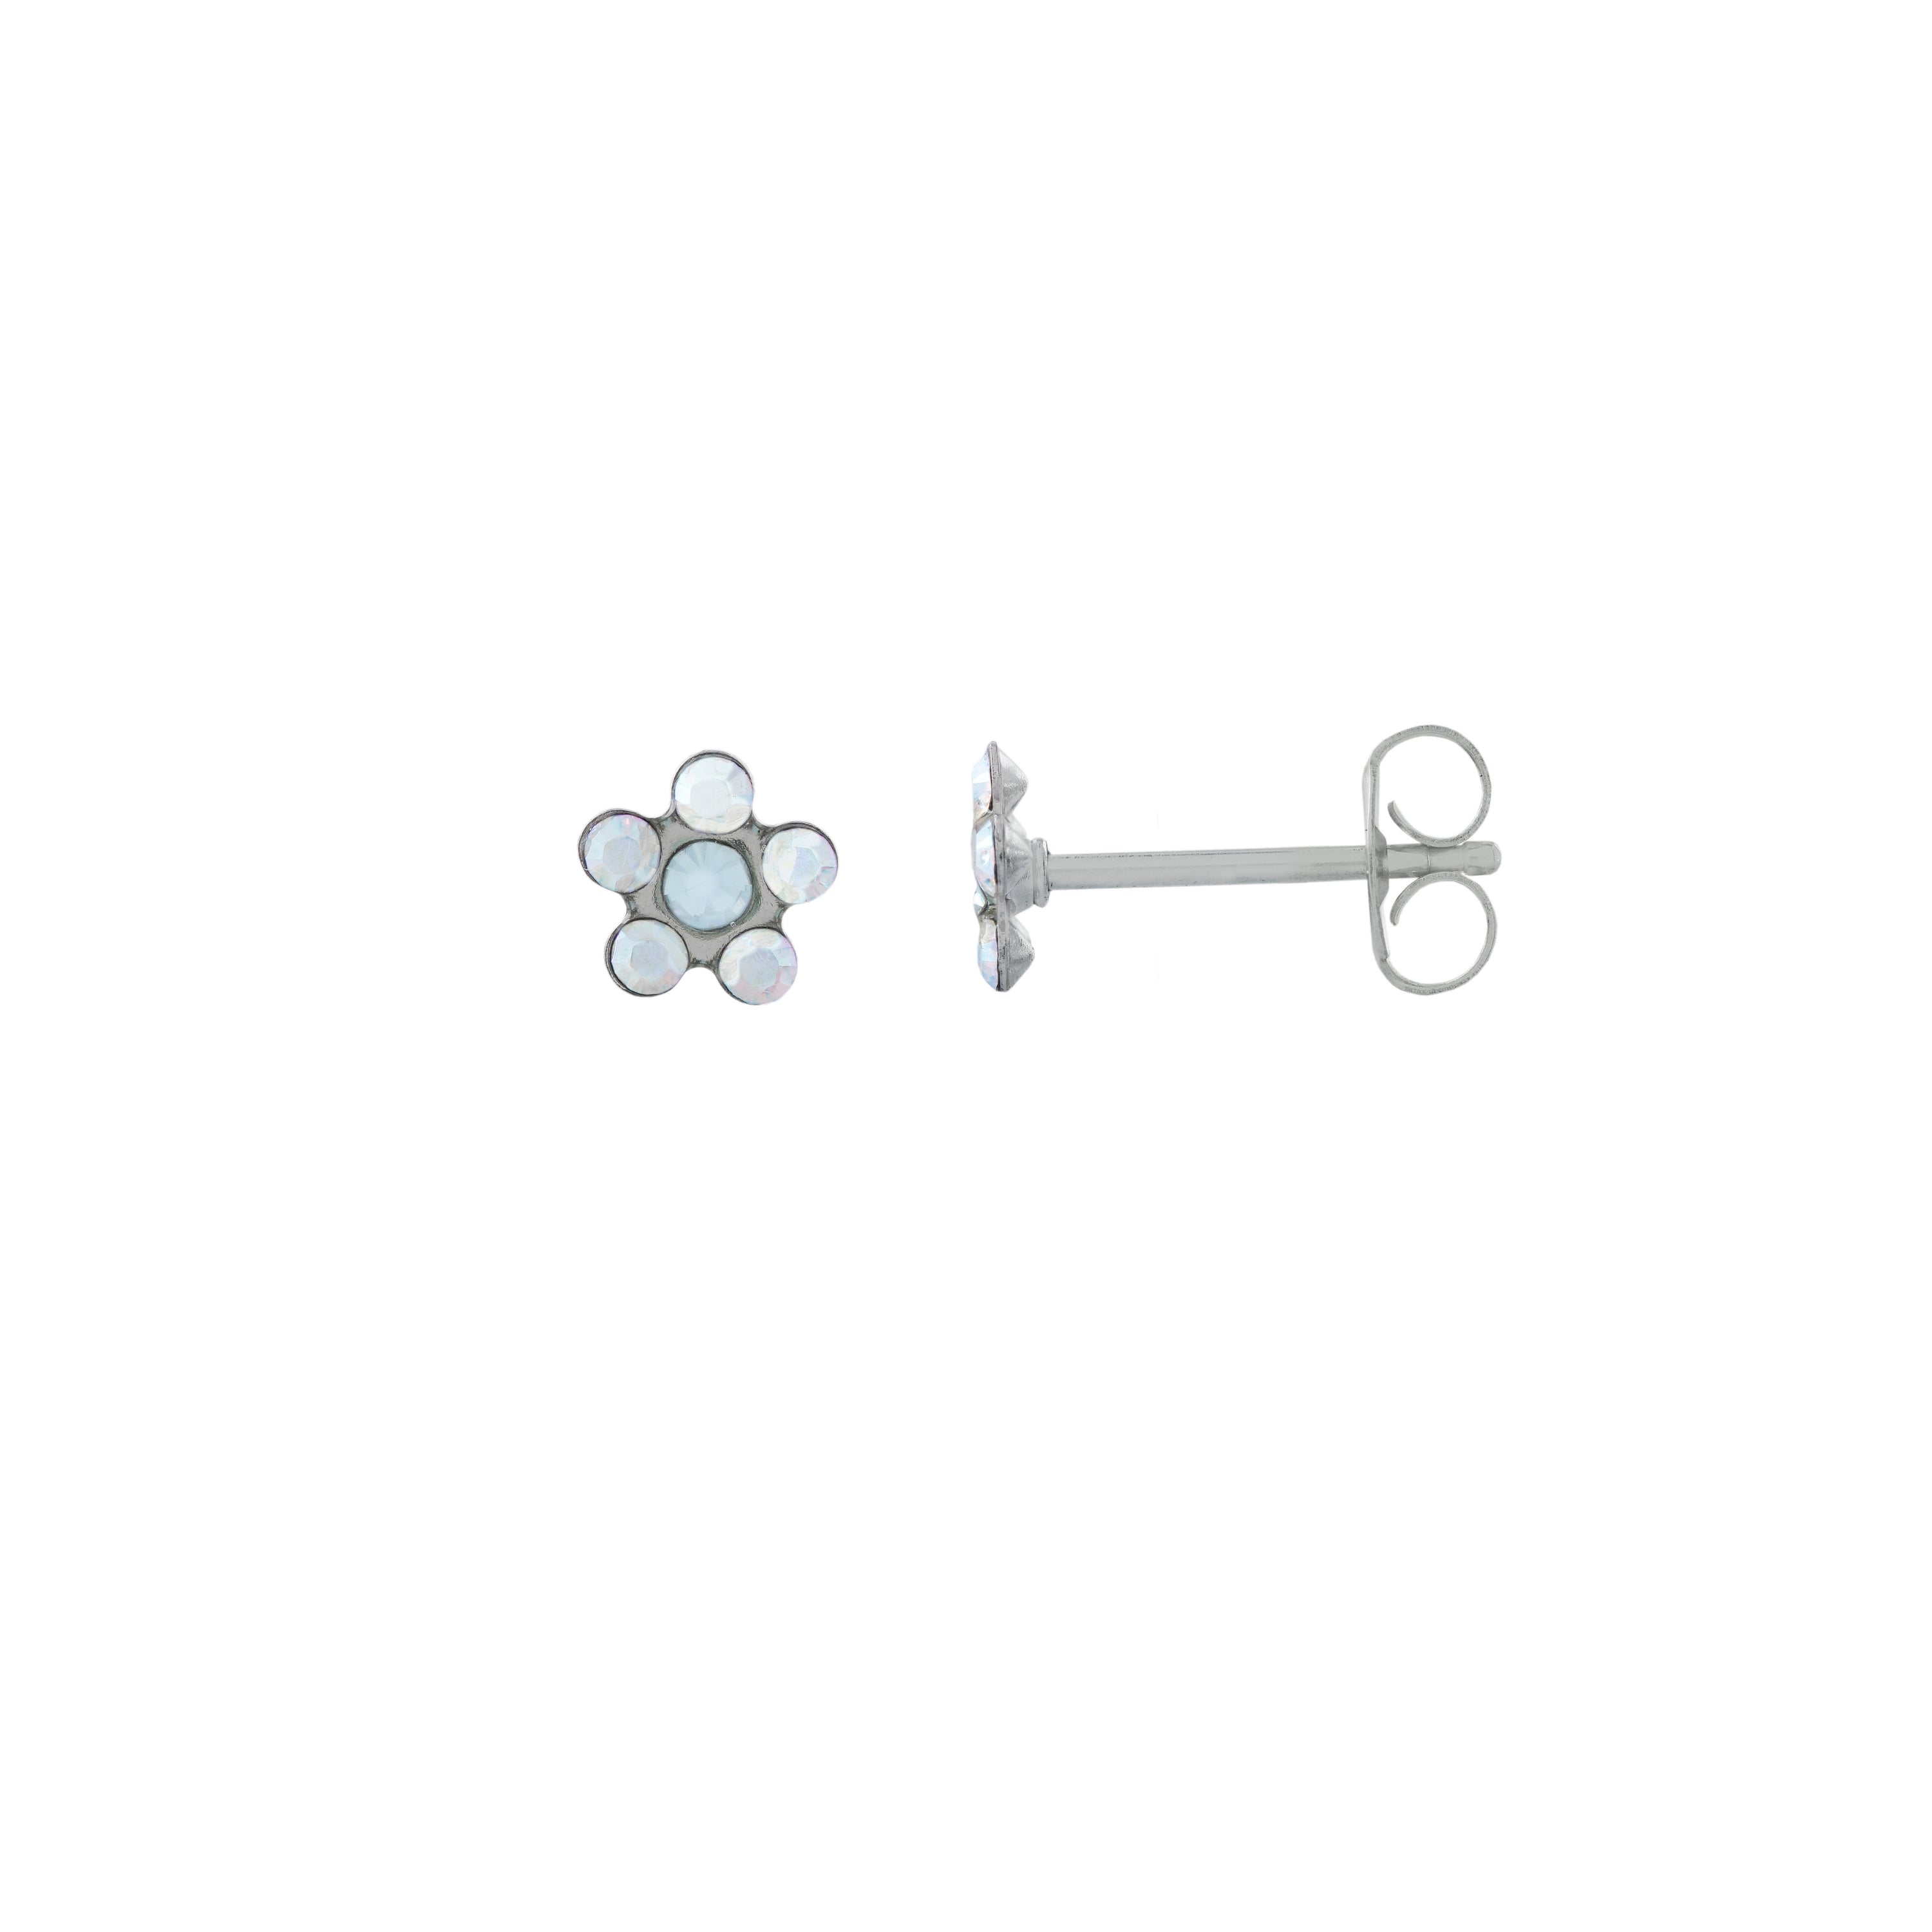 Daisy Ab Crystal-March Aquamarine Allergy-free Stainless Steel Ear Studs For Kids